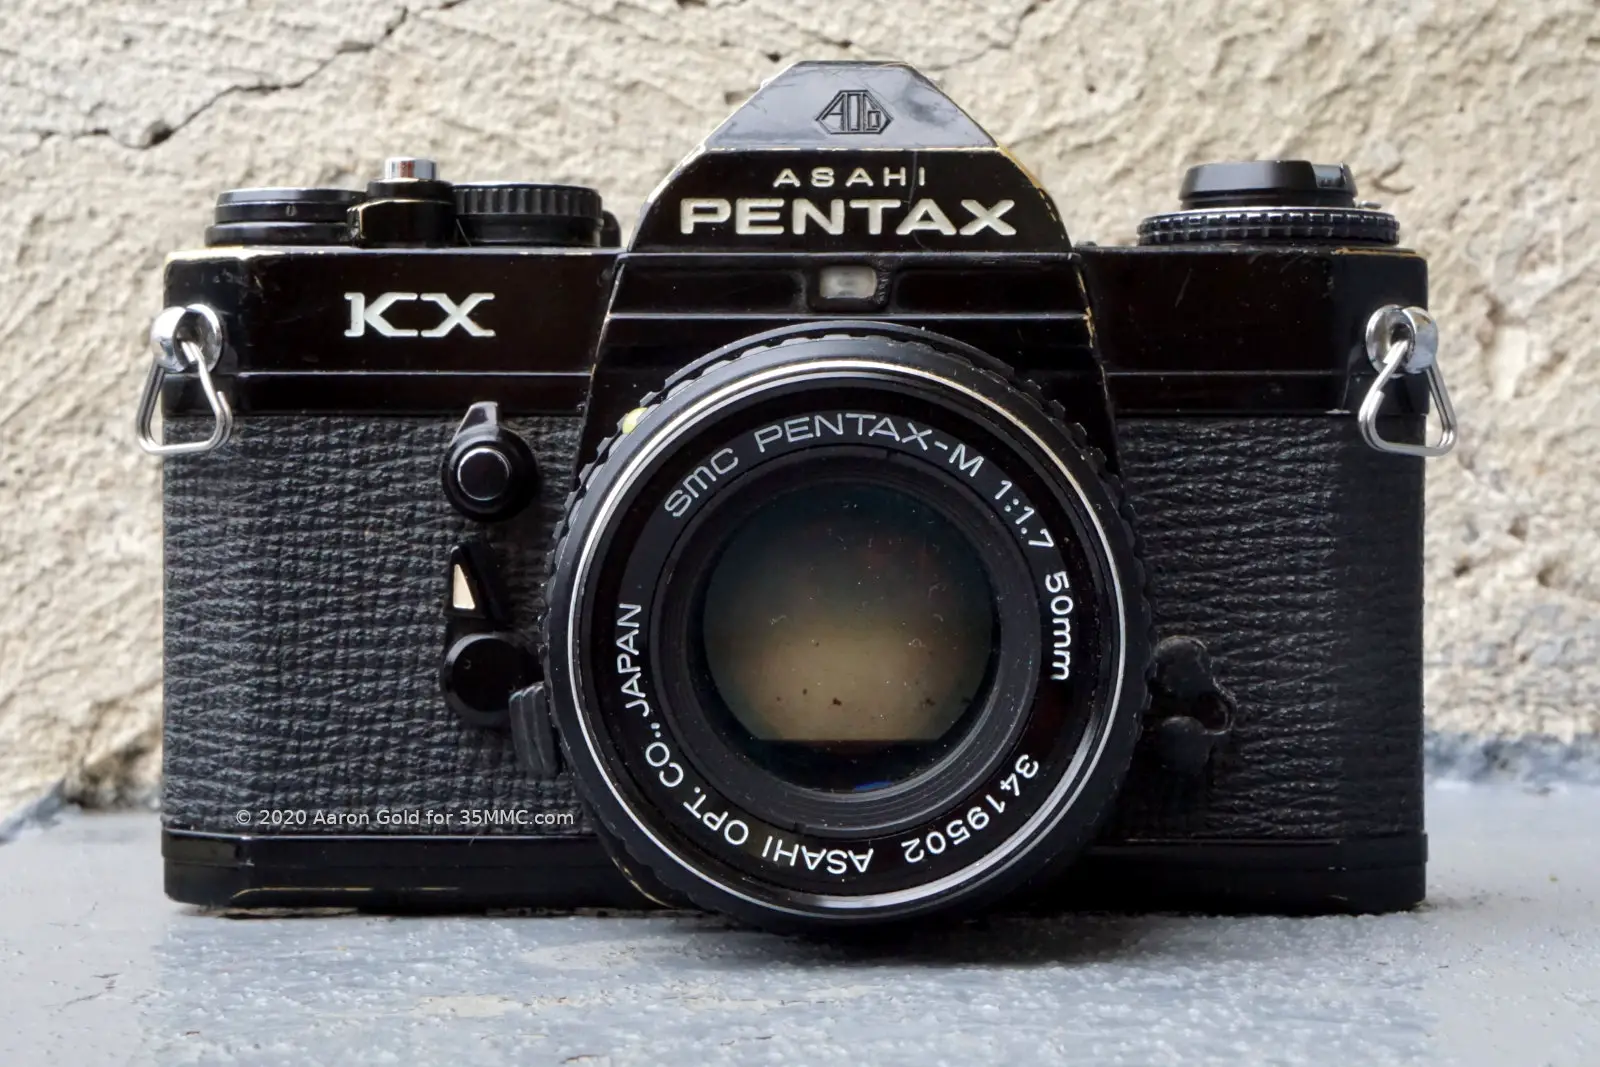 Pentax KX review: My first. My favorite? - by Aaron Gold - 35mmc